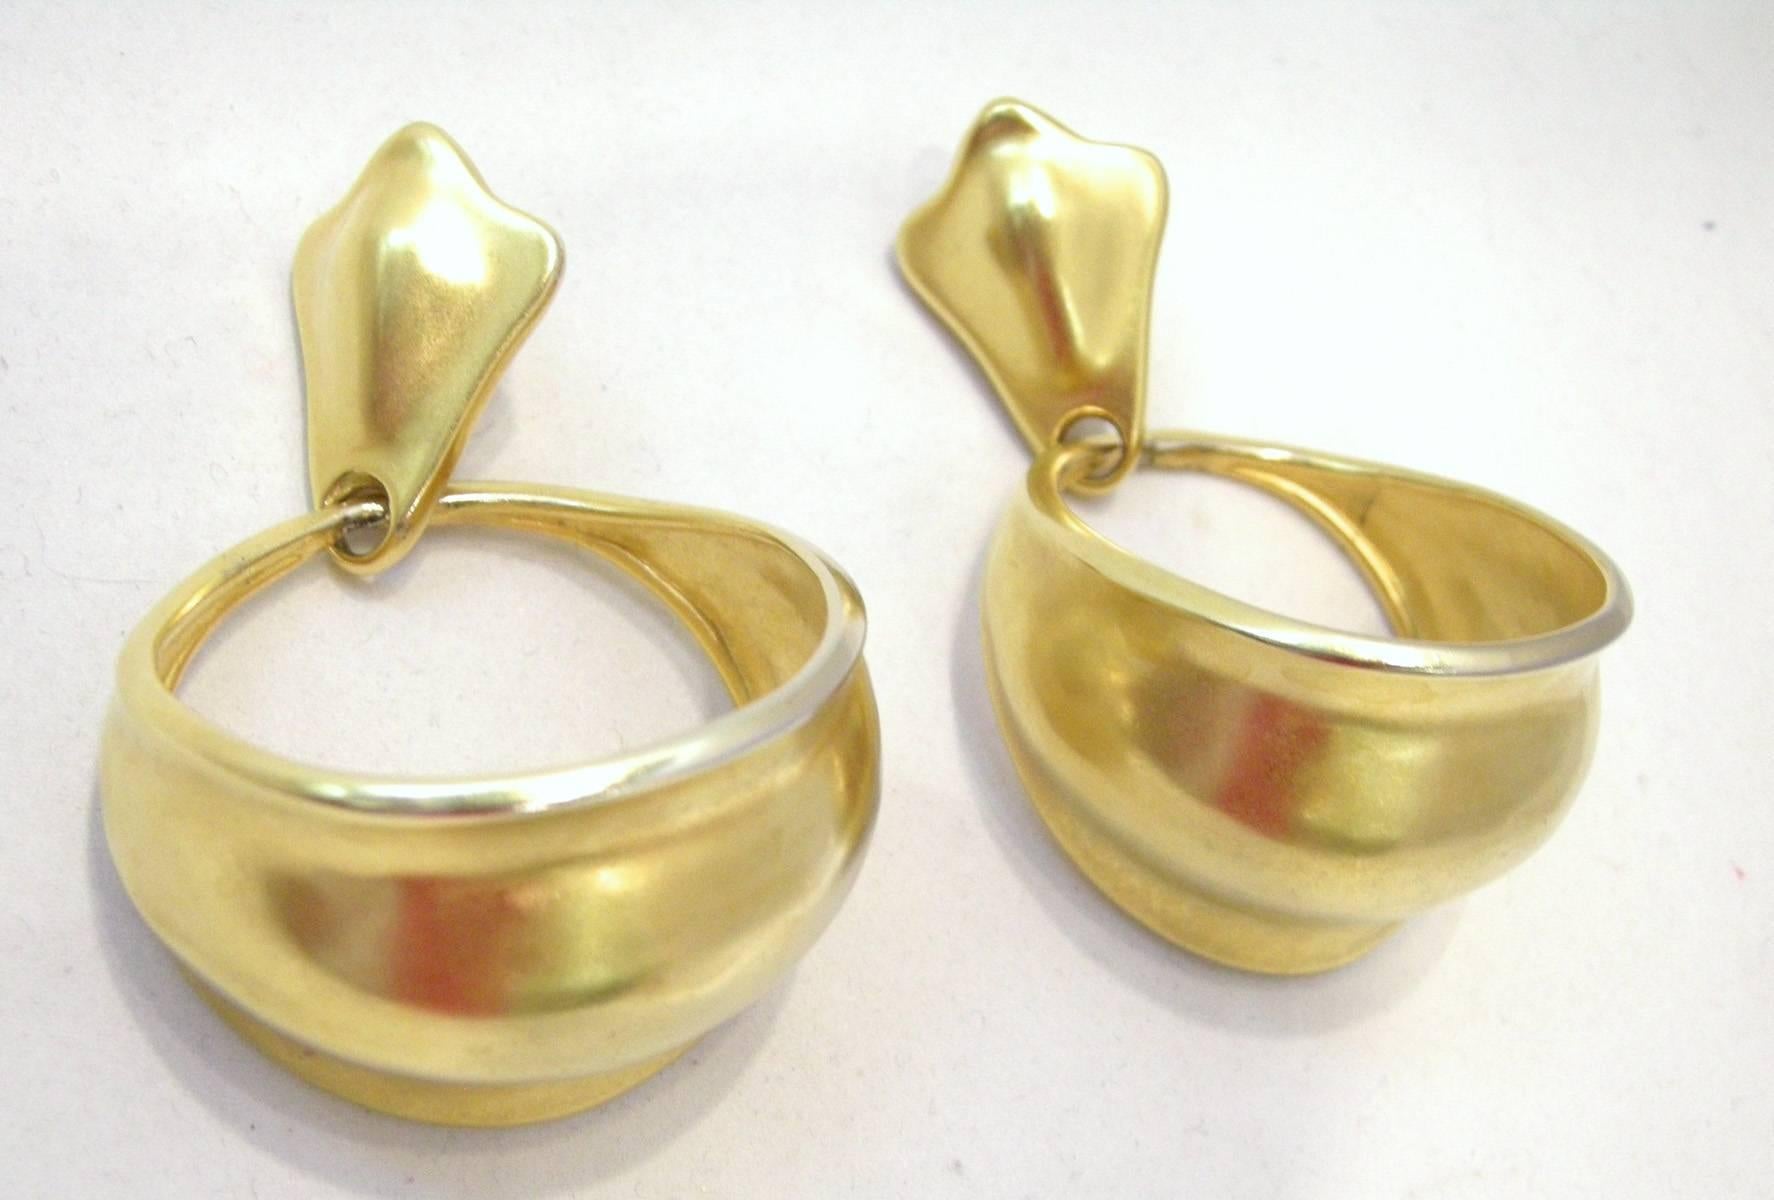 These wonderful Robert Lee Morris clip earrings has a triangular top that connects to a huge dangling hoop in his famous matted gold tone finish.  They measure 2-7/8” long x 1-3/4” wide.  They are signed “Robert Lee Morris” and is in excellent